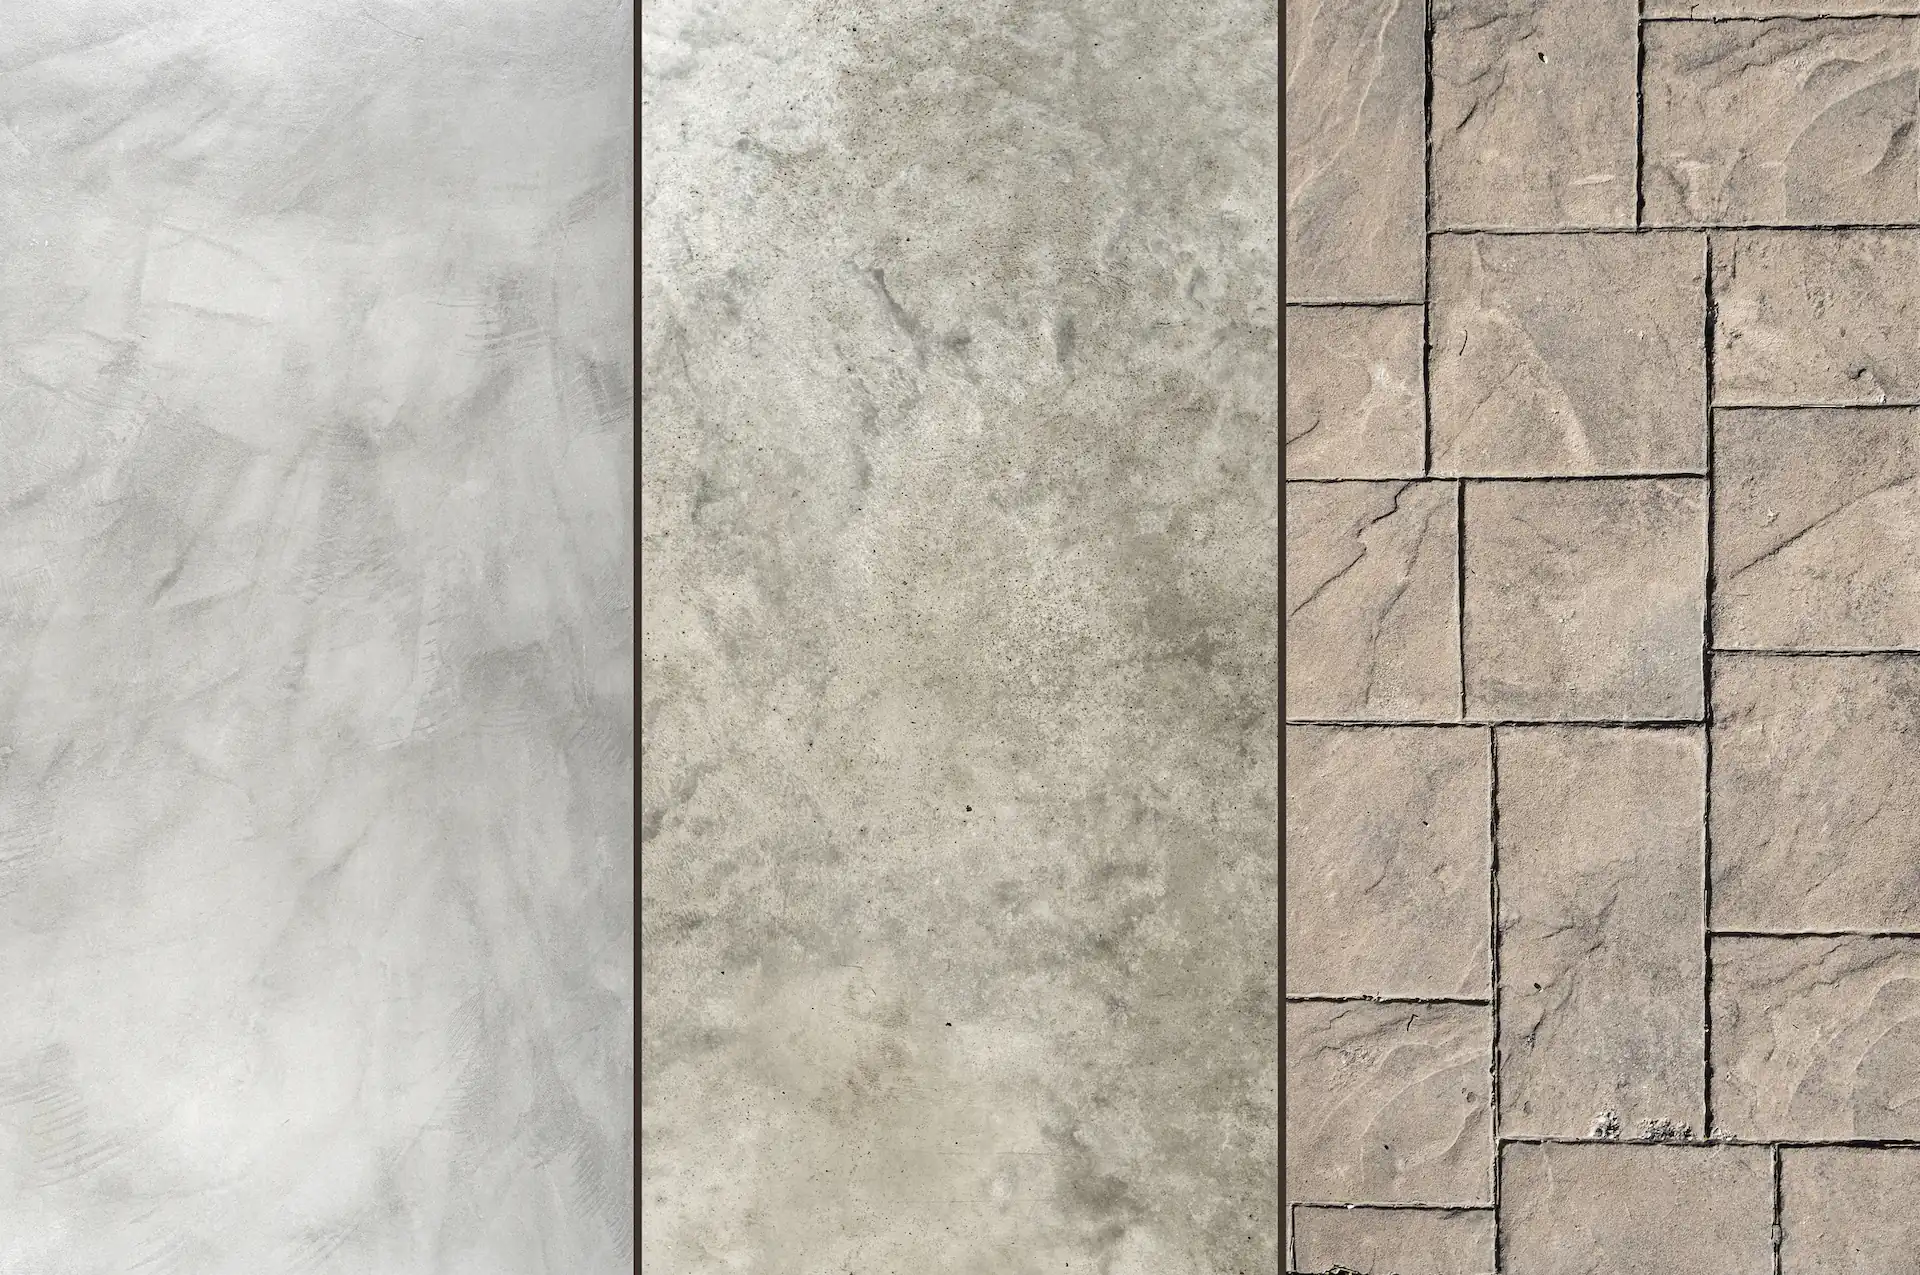 Three concrete solutions laid side by side: traditional, polished, and stamped. These are each option to an consider for a Finished Basement with Concrete.